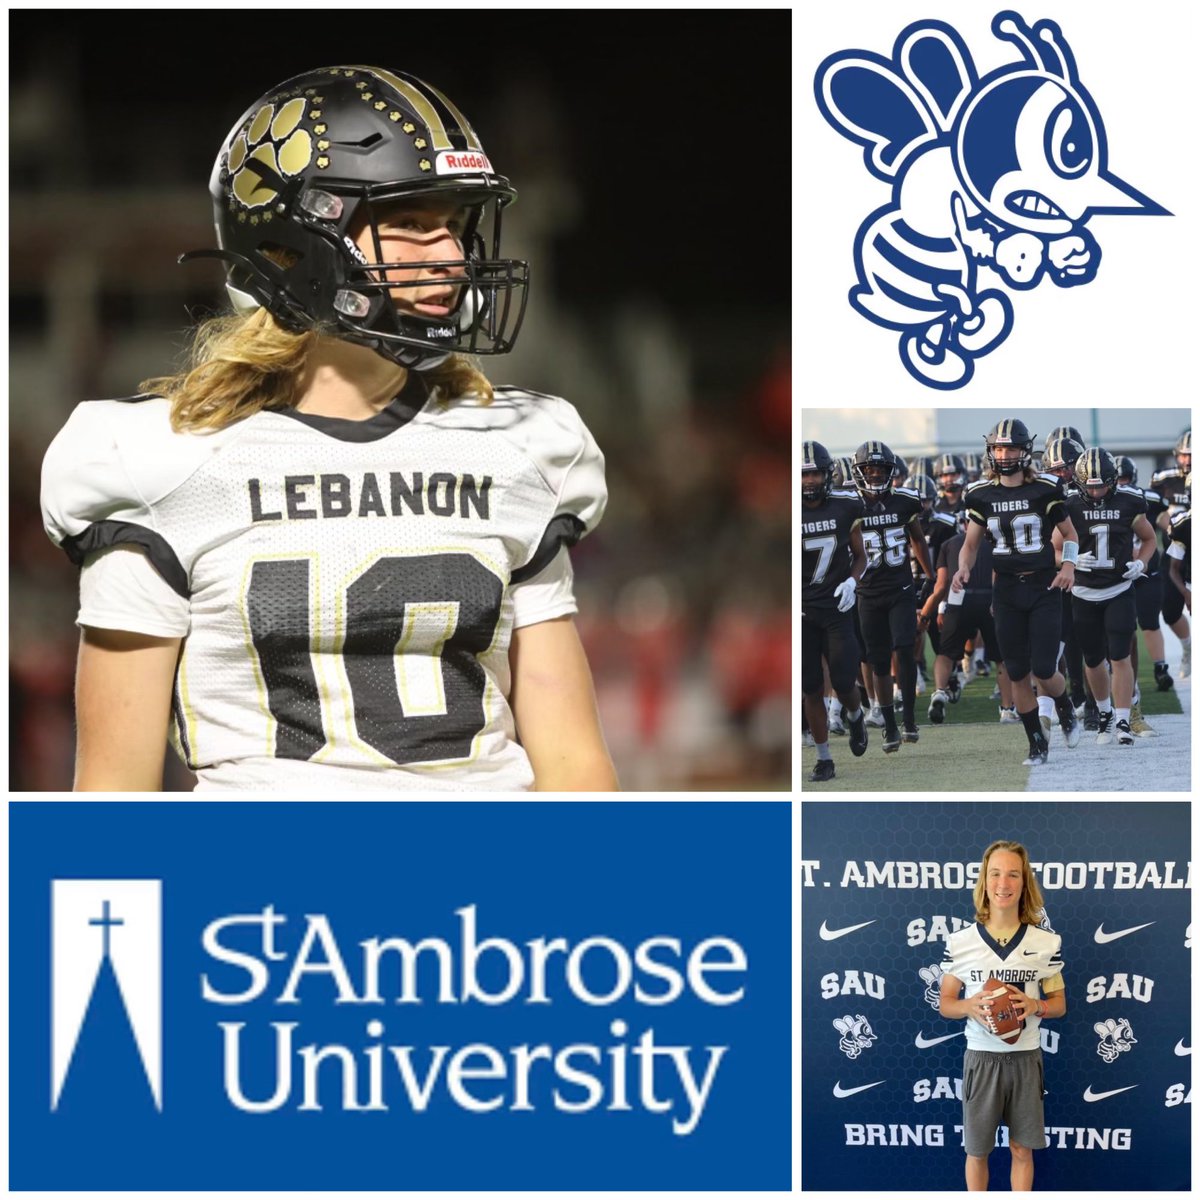 I’m very blessed and excited to announce that I will be furthering my academic and football career on scholarship at St. Ambrose University!!! Thank you to my family, coaches, and teammates who made this possible. @FillippSAU @SAU_CoachQ @CoachSCDub @CoachJeffSmock